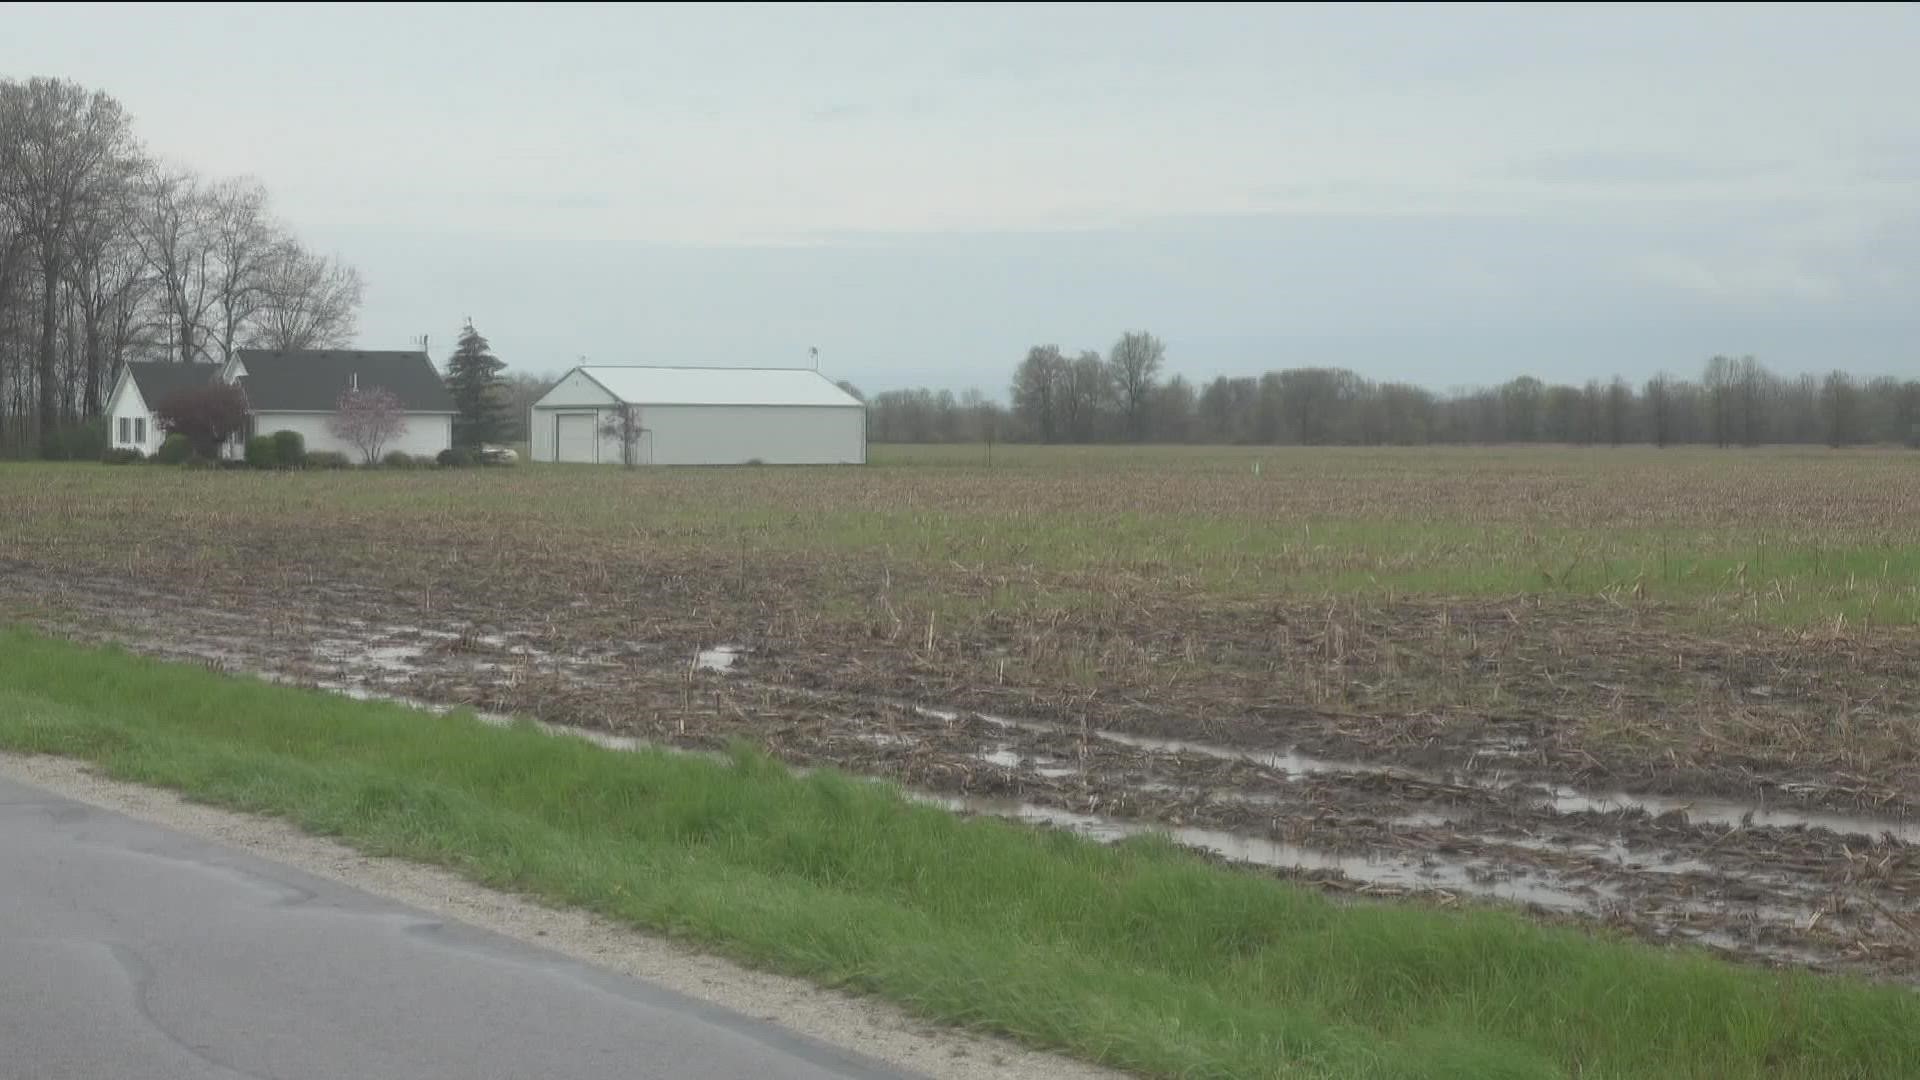 One northwest Ohio farmer says late-season cold will become the new normal for farmers, thanks to climate change.